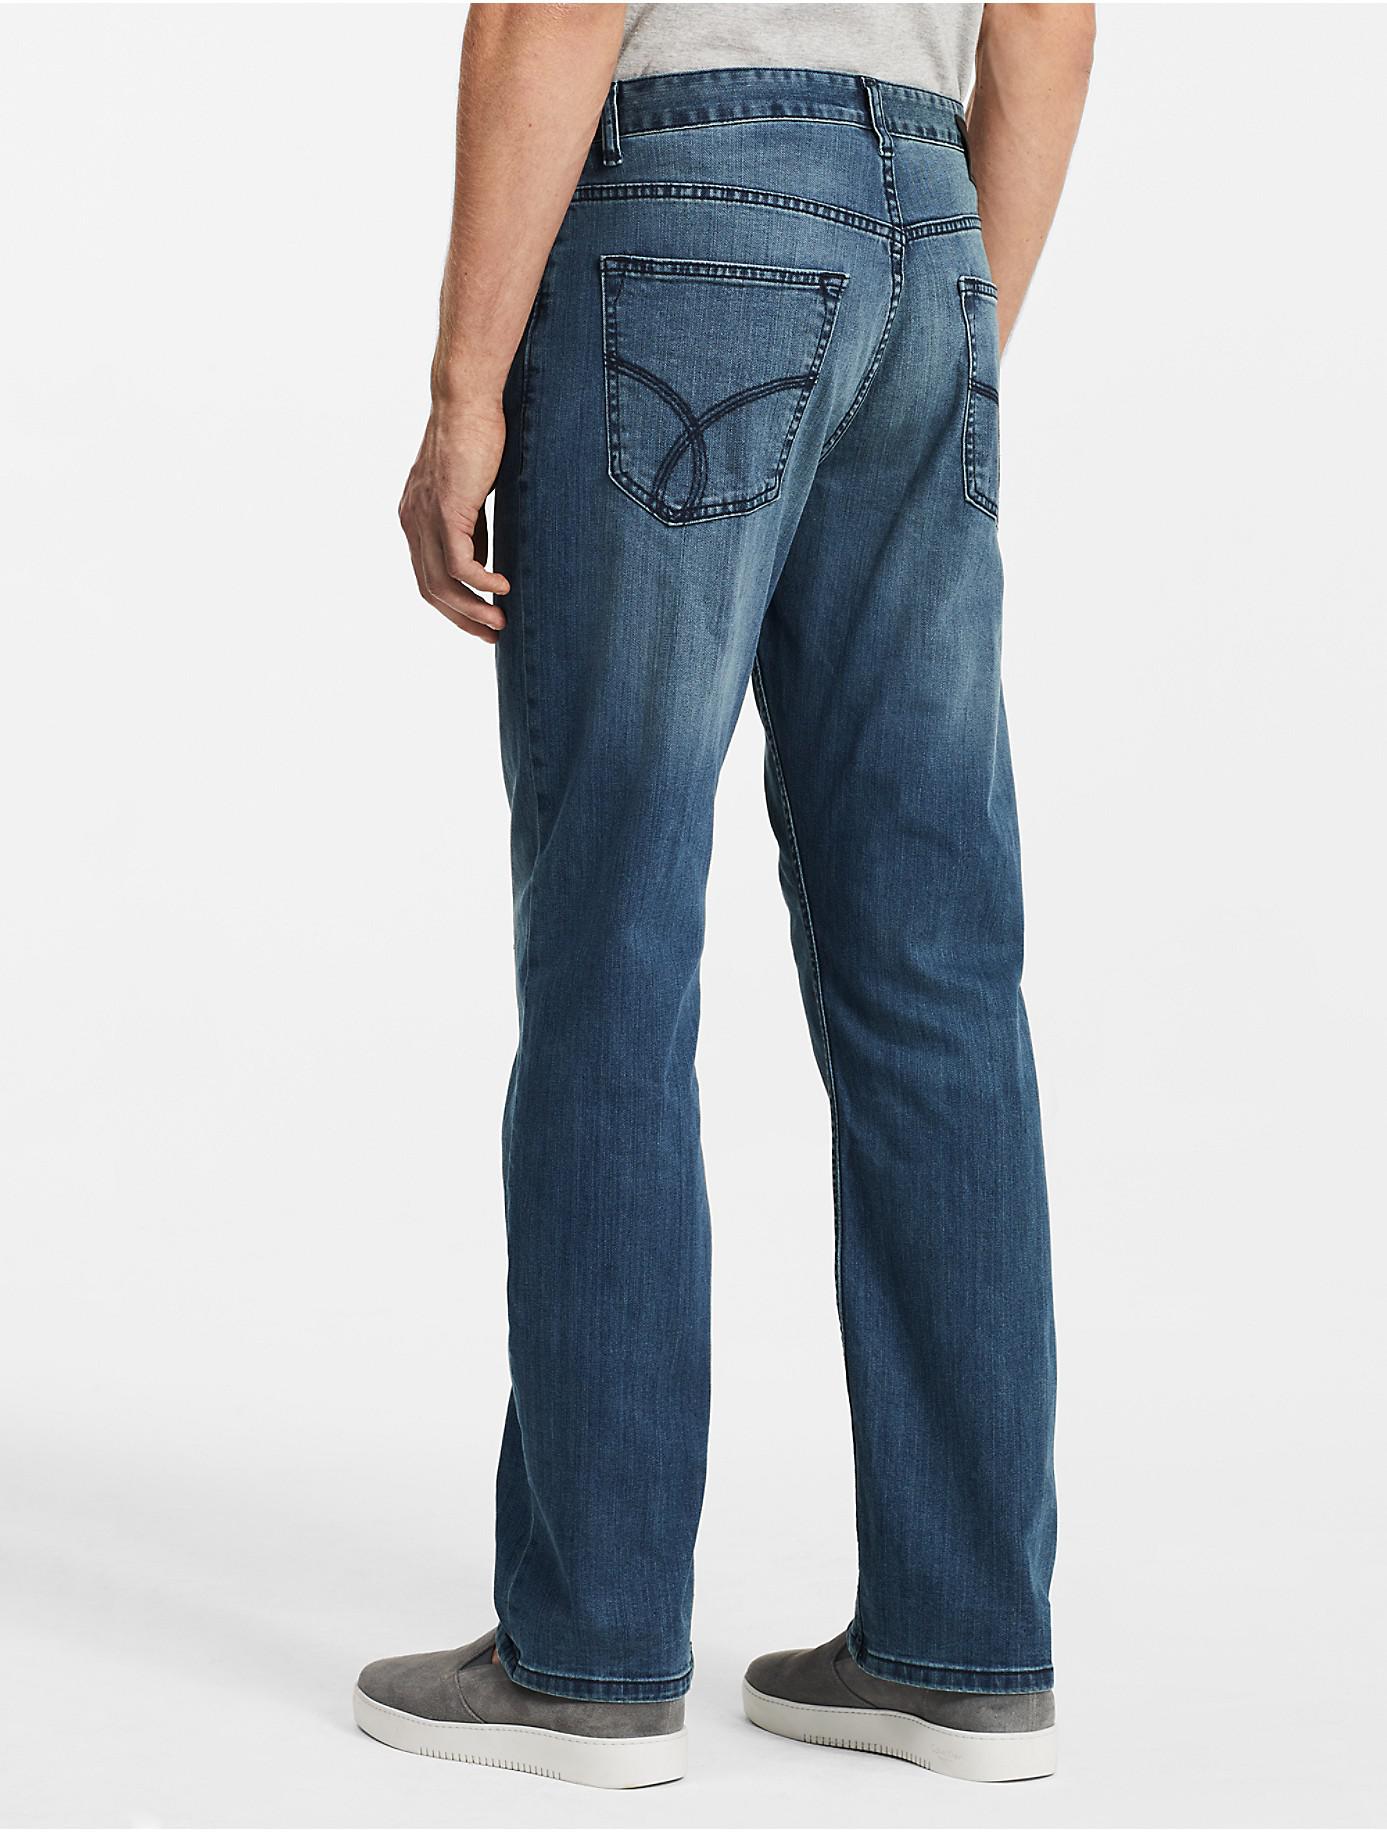 Calvin Klein Jeans Mens 38 Blue Relaxed Straight Denim Pants Adult ...